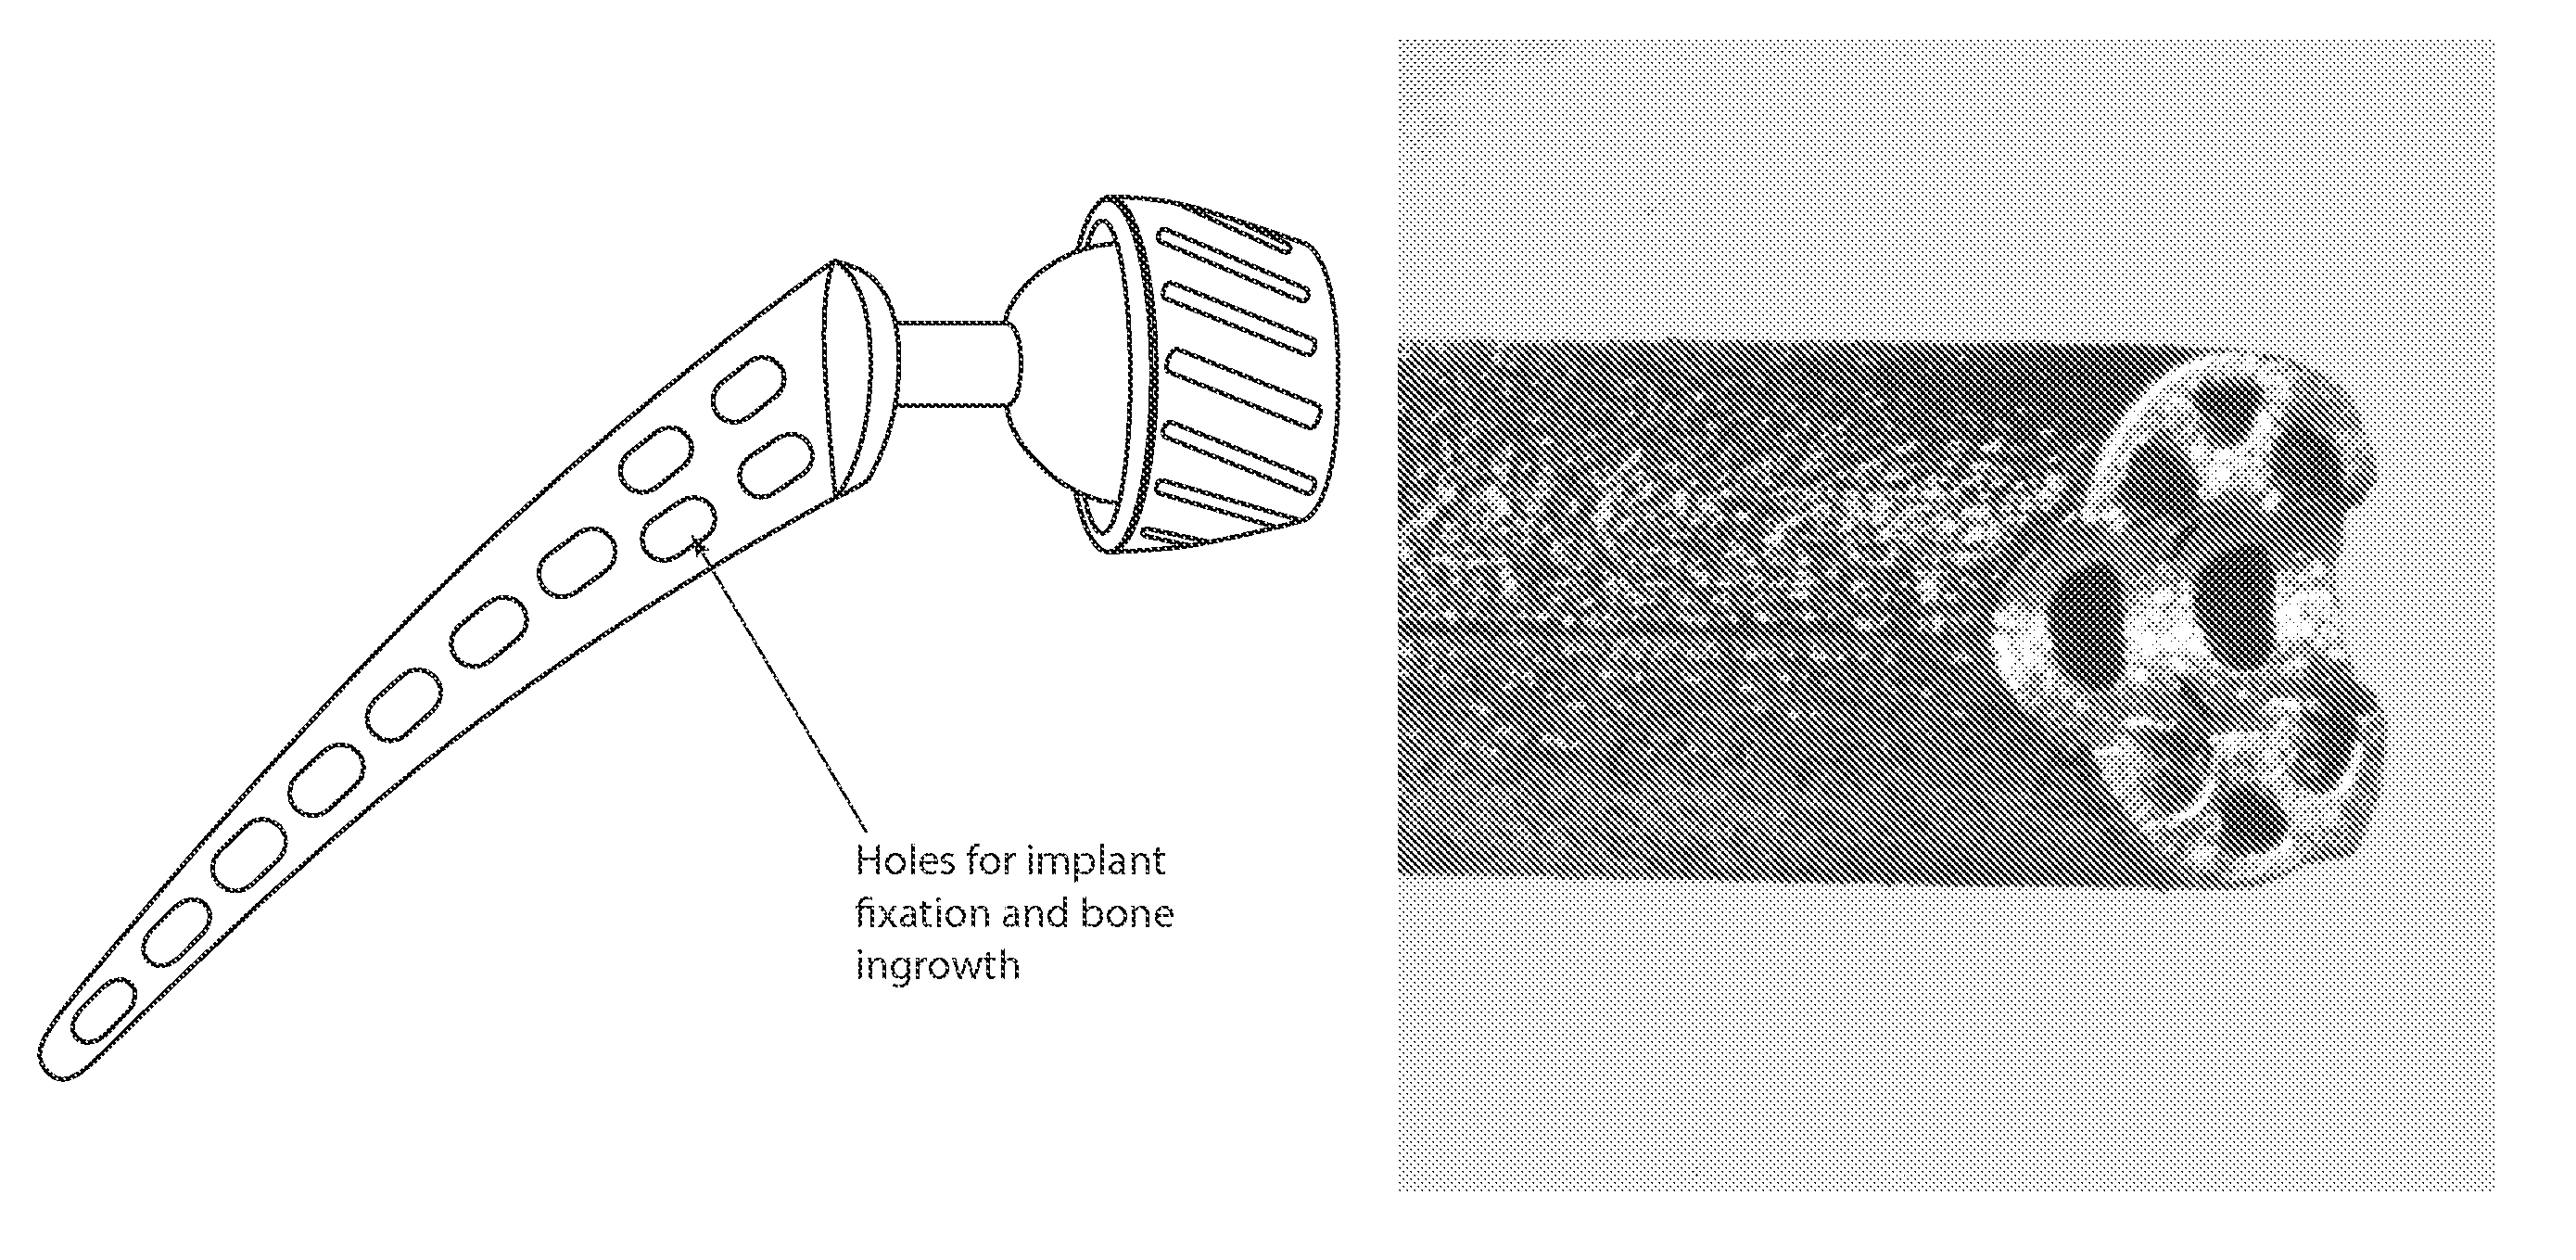 Orthopaedic implants and methods of forming implant structures